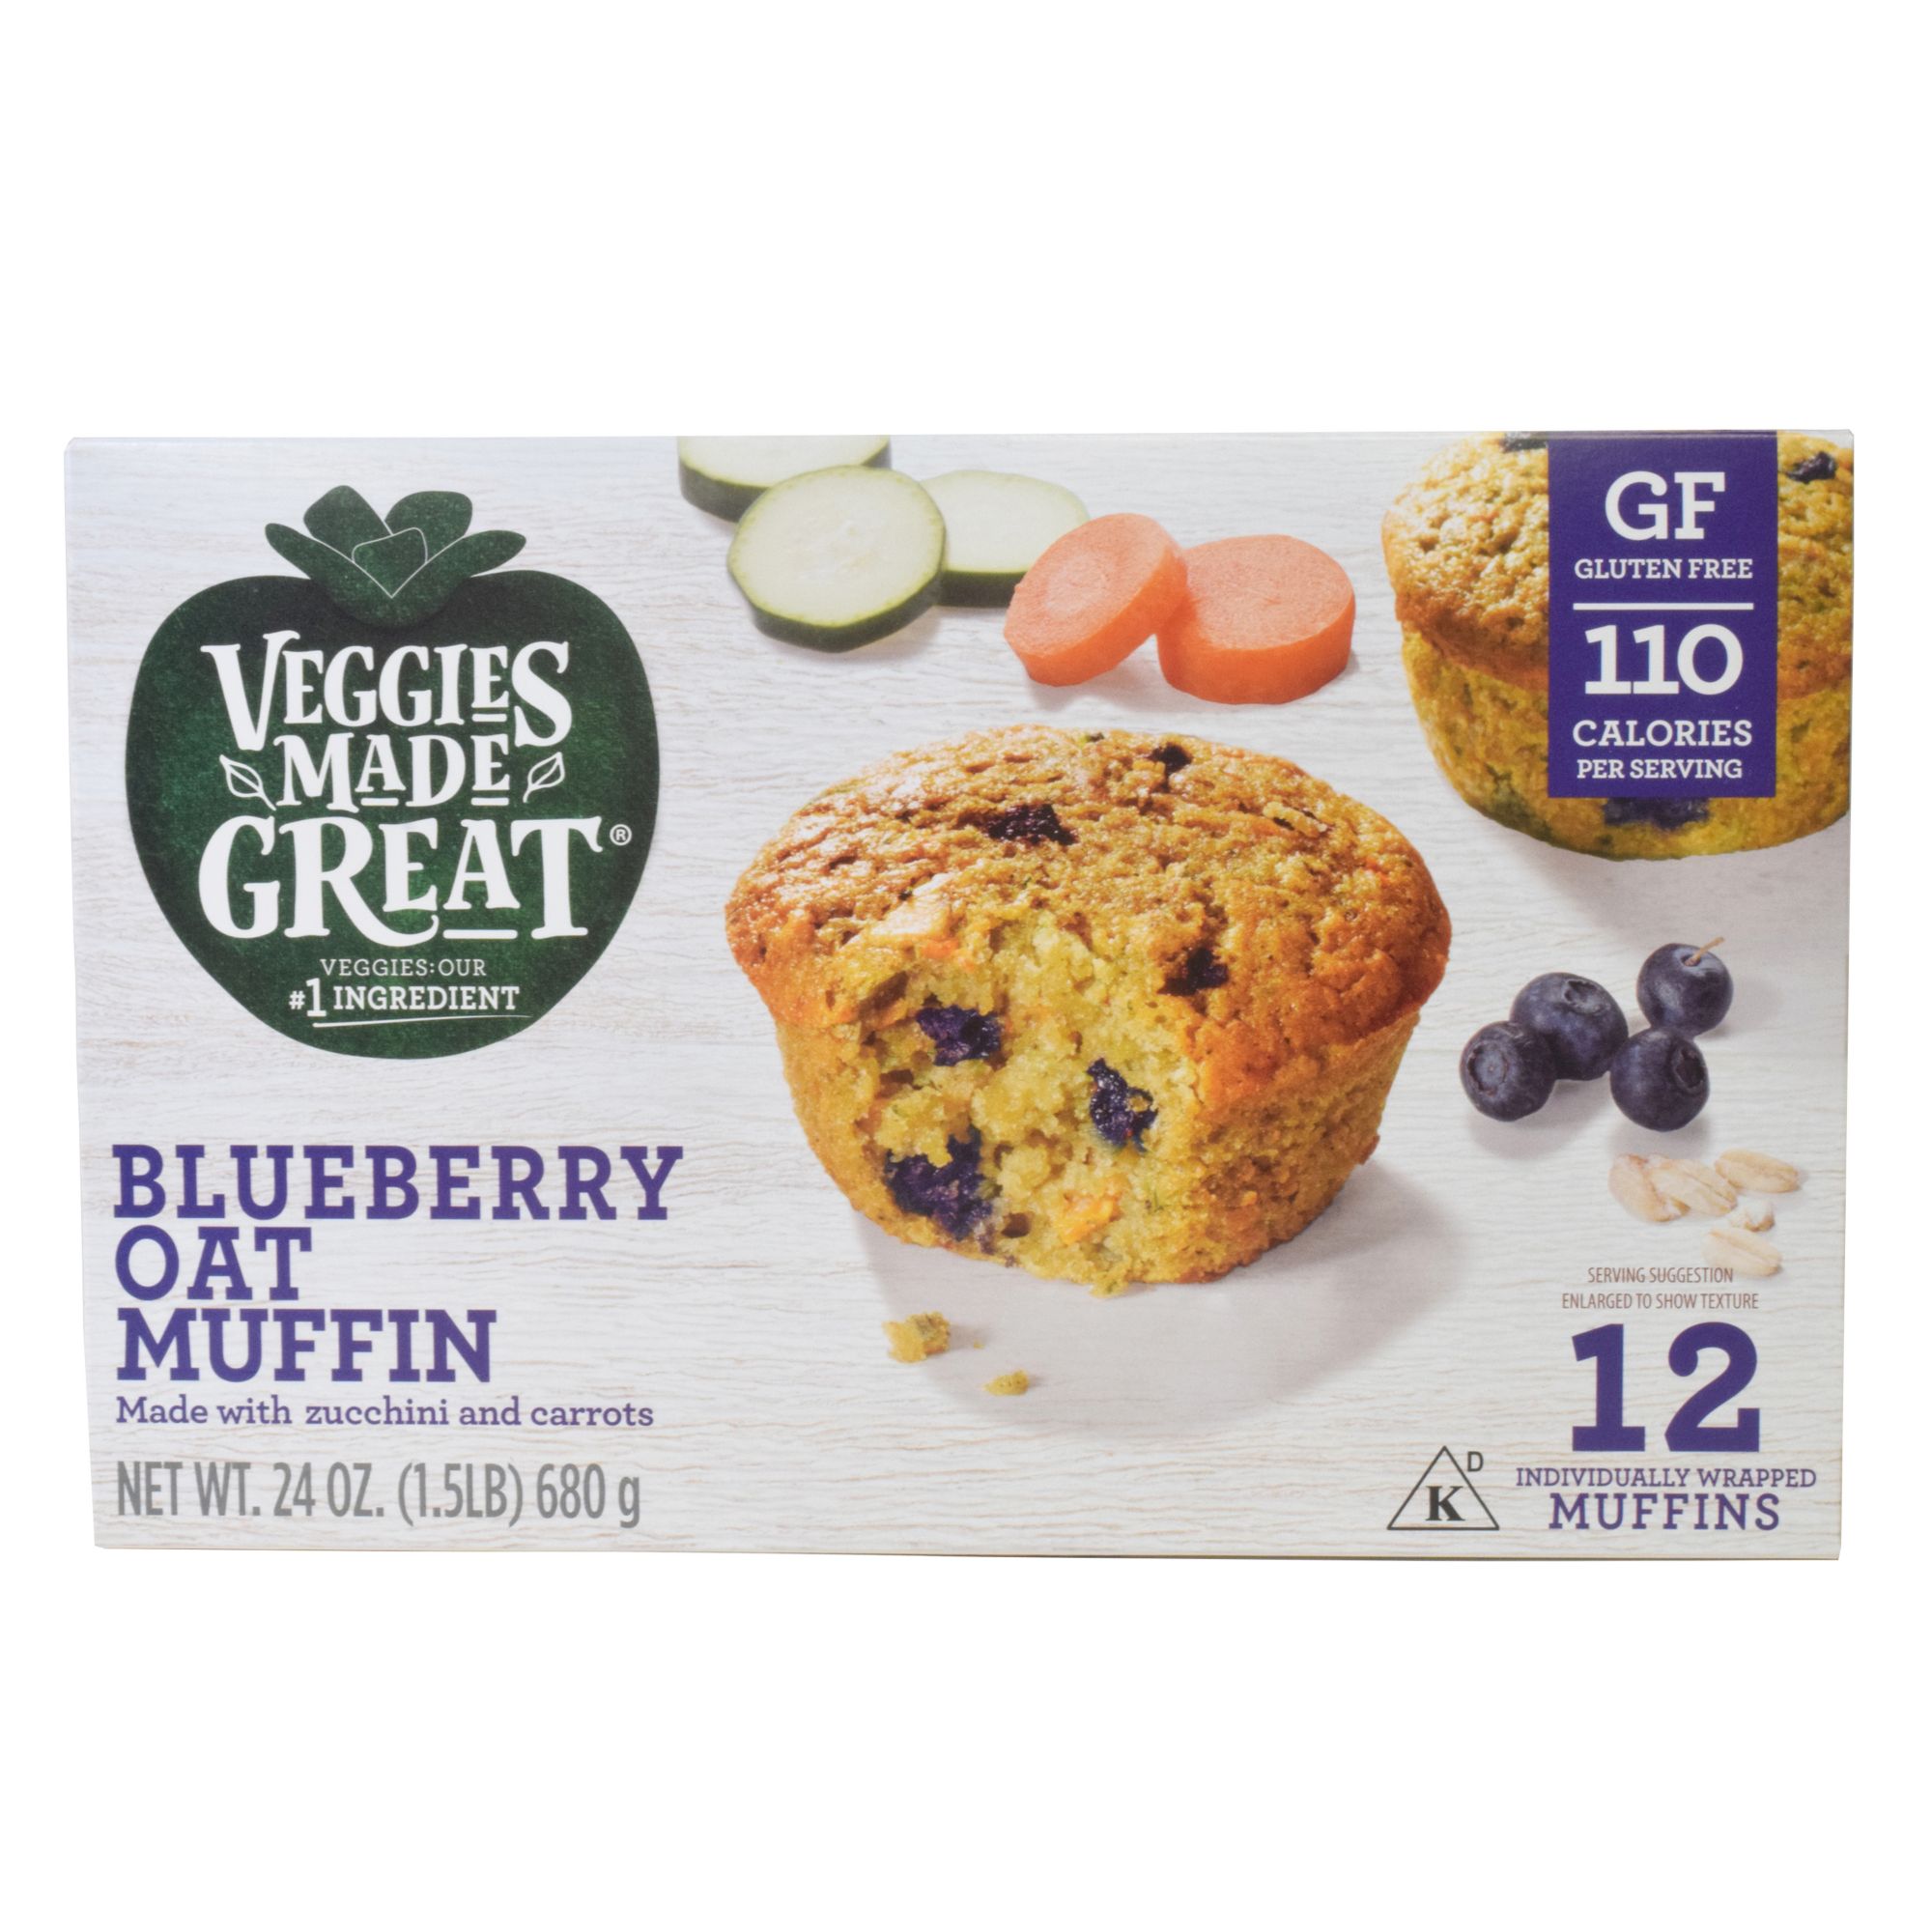 Veggies Made Great Blueberry Oat Muffin, 12 ct | BJ's Wholesale Club